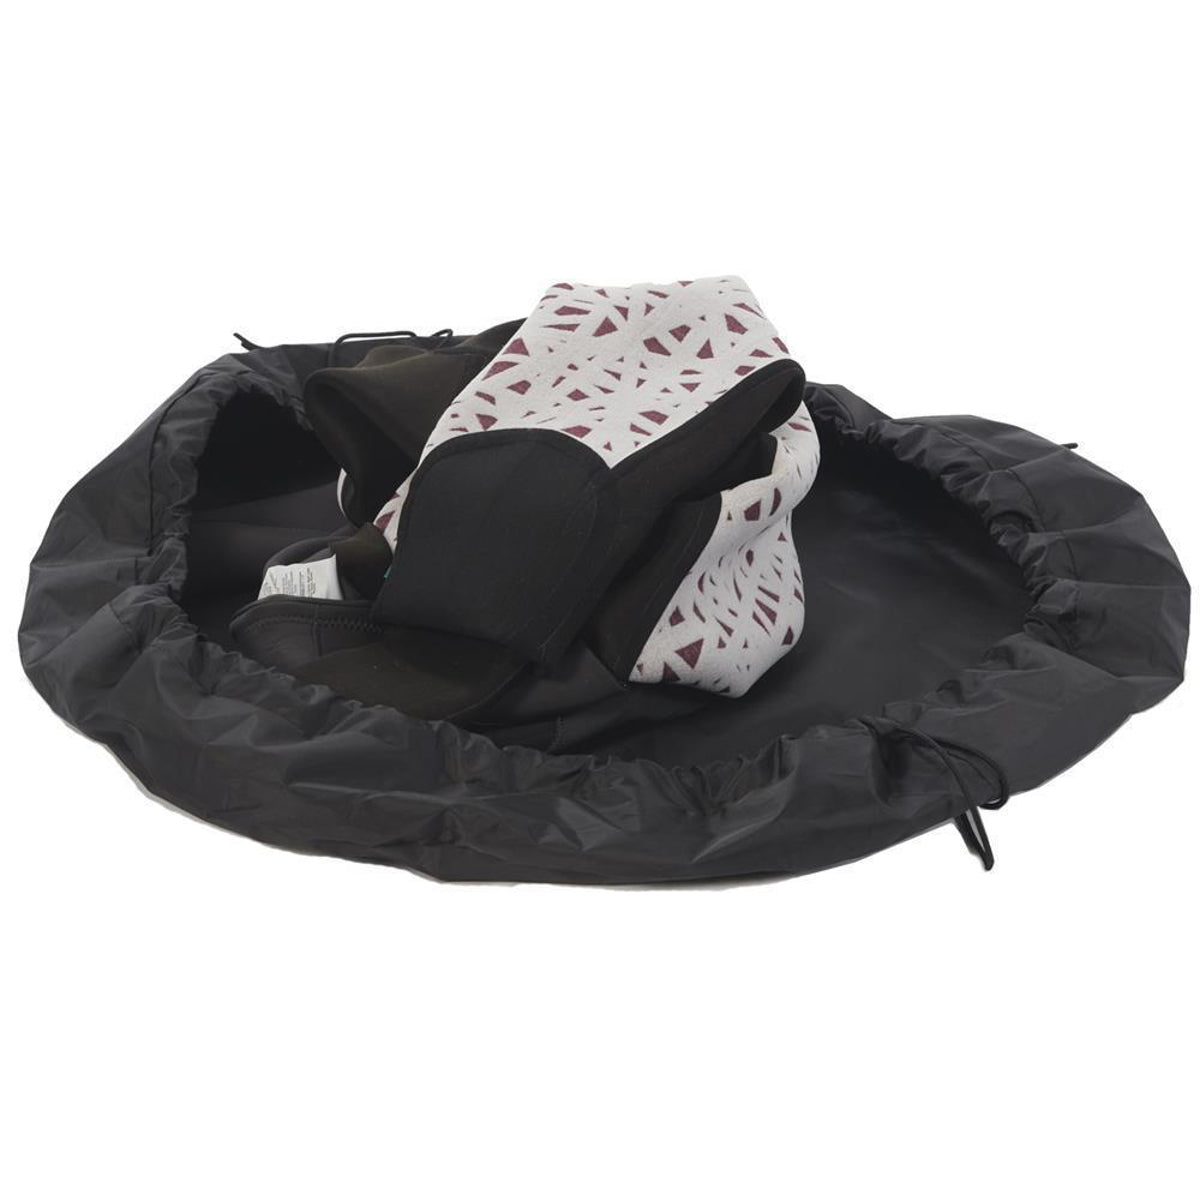  Palmyth Packable Wader Bag with Changing Mat for